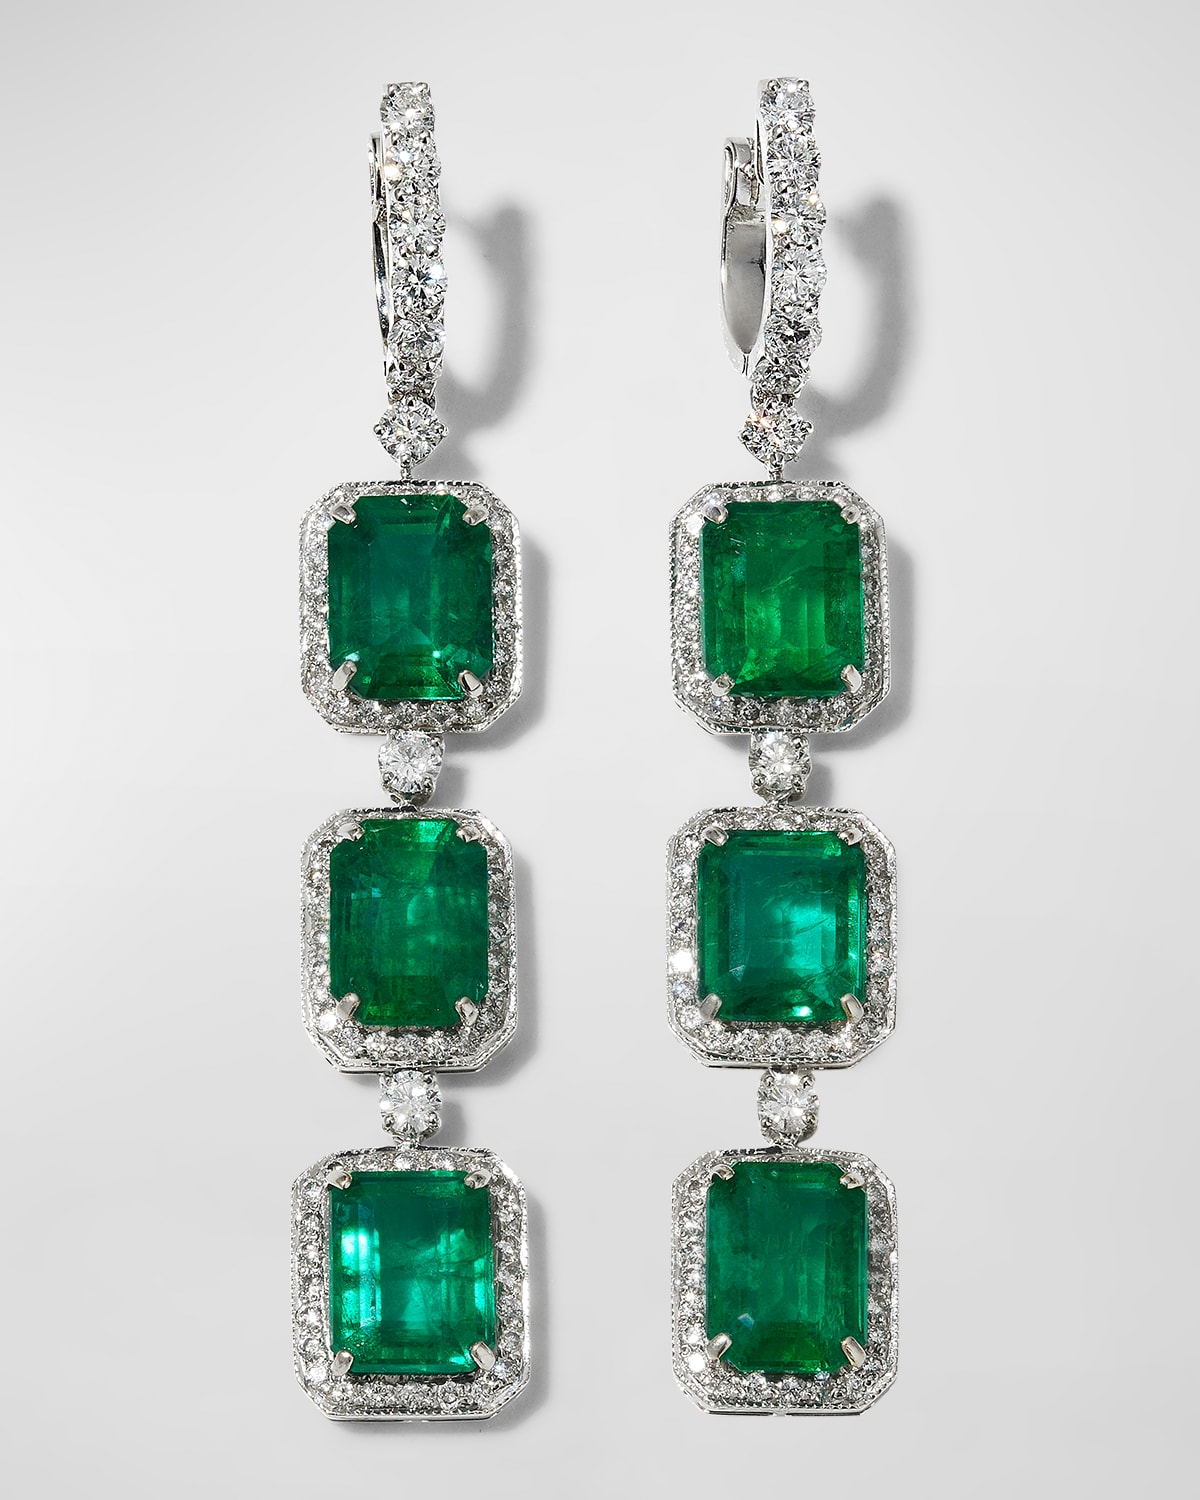 White Gold Emerald 3-Drop Earrings with Diamonds